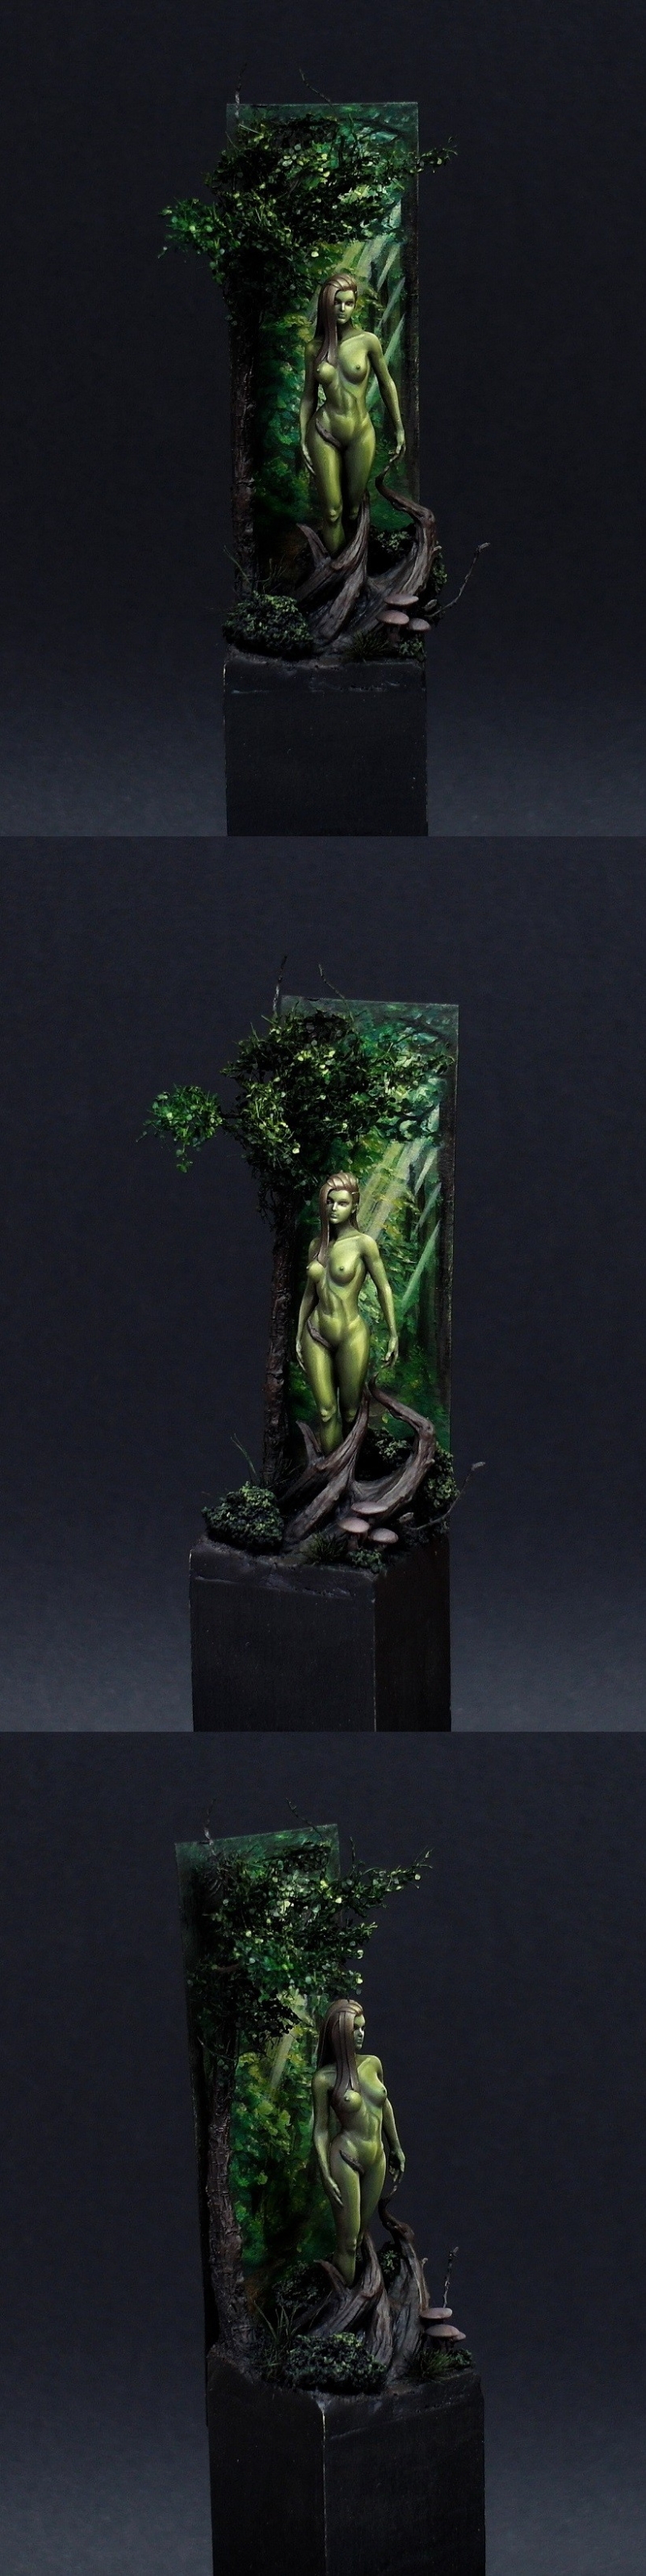 Dryad - Lord of the Print